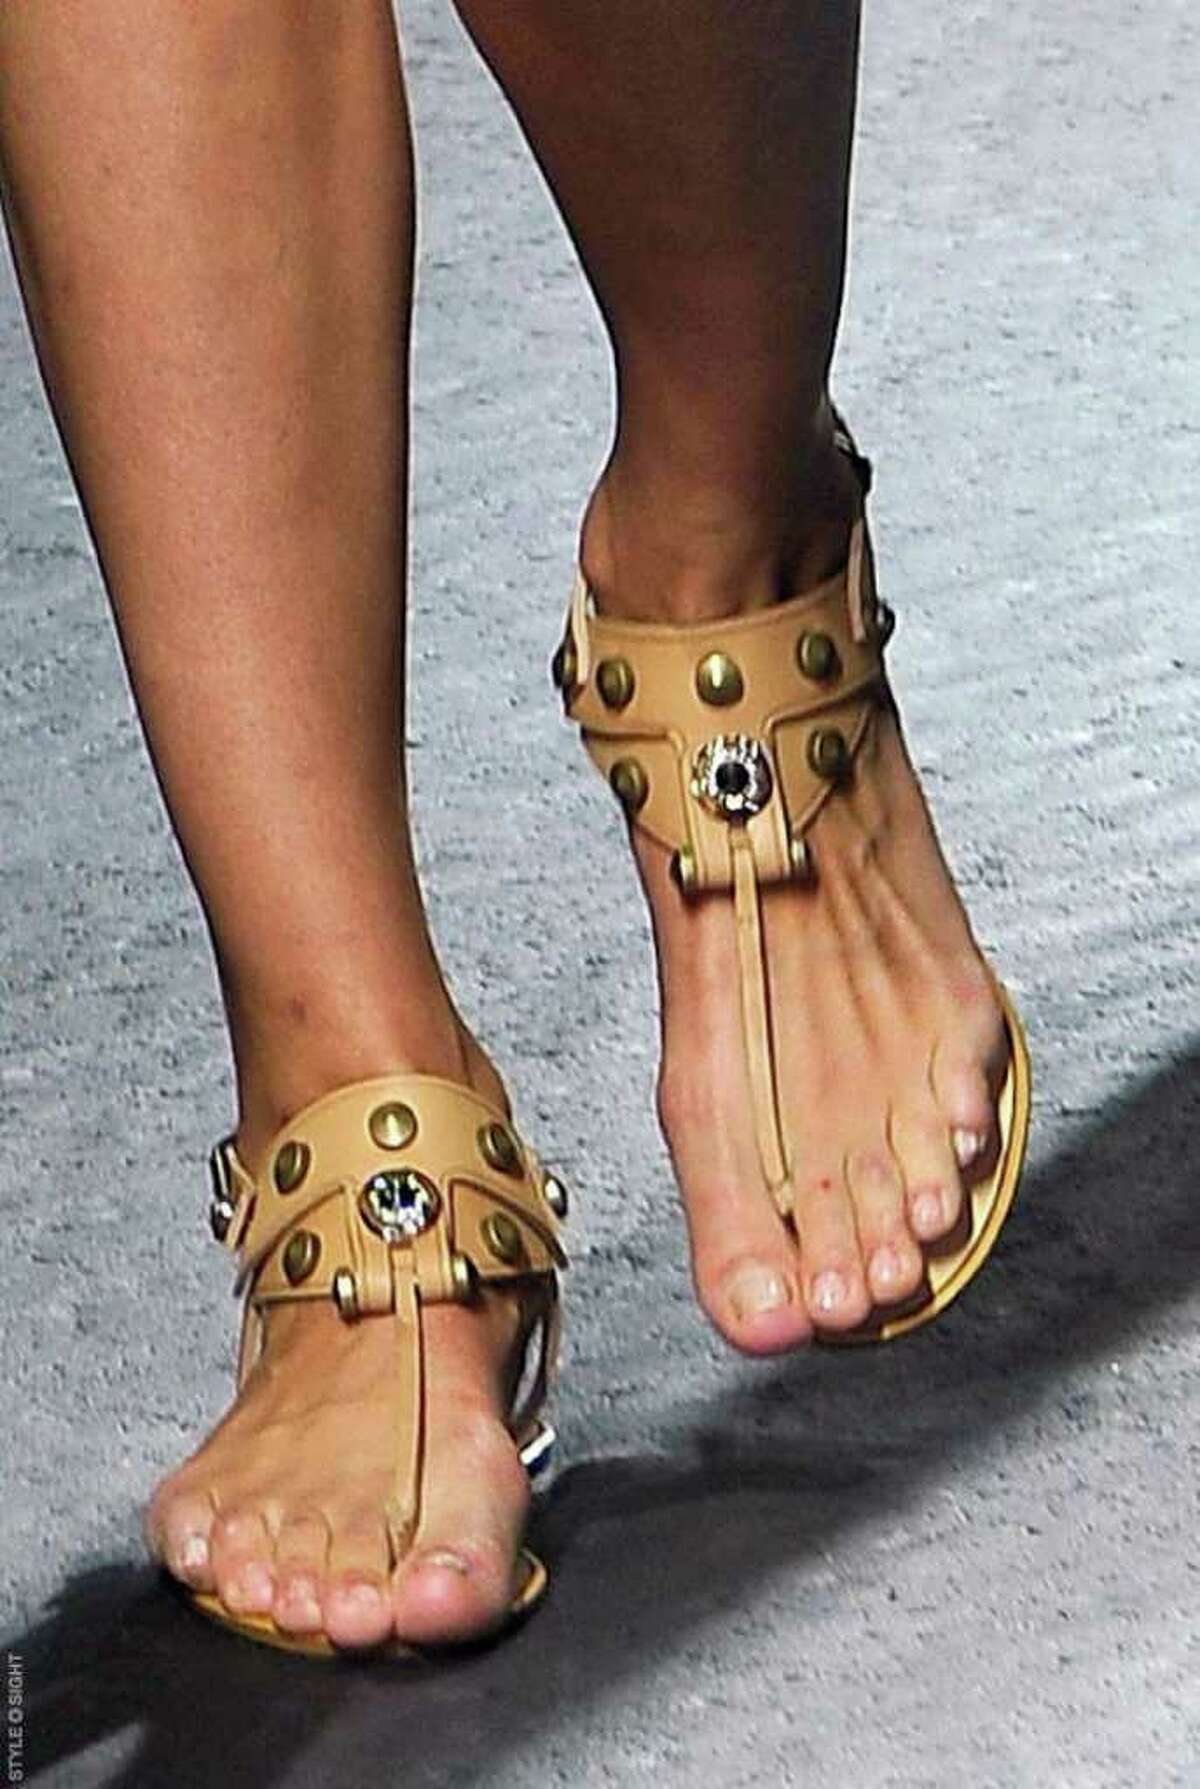 A sizzle in your step SANDALS: Styles that resemble ankle jewelry prove ...